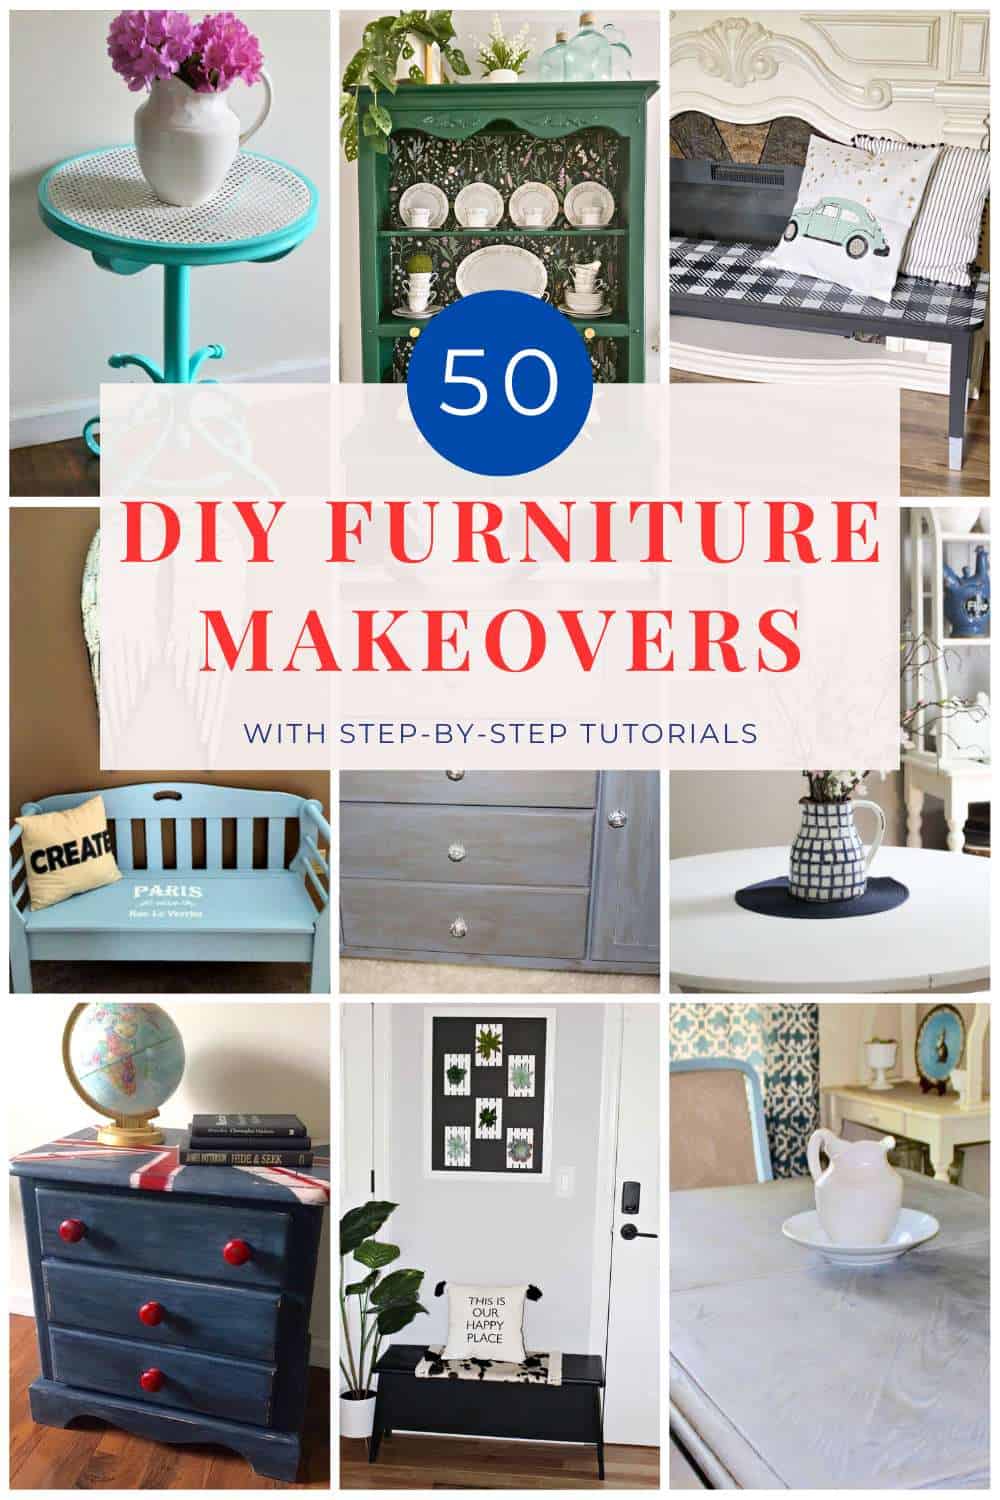 DIY Furniture Makeovers Collage with 9 images and text overlay.